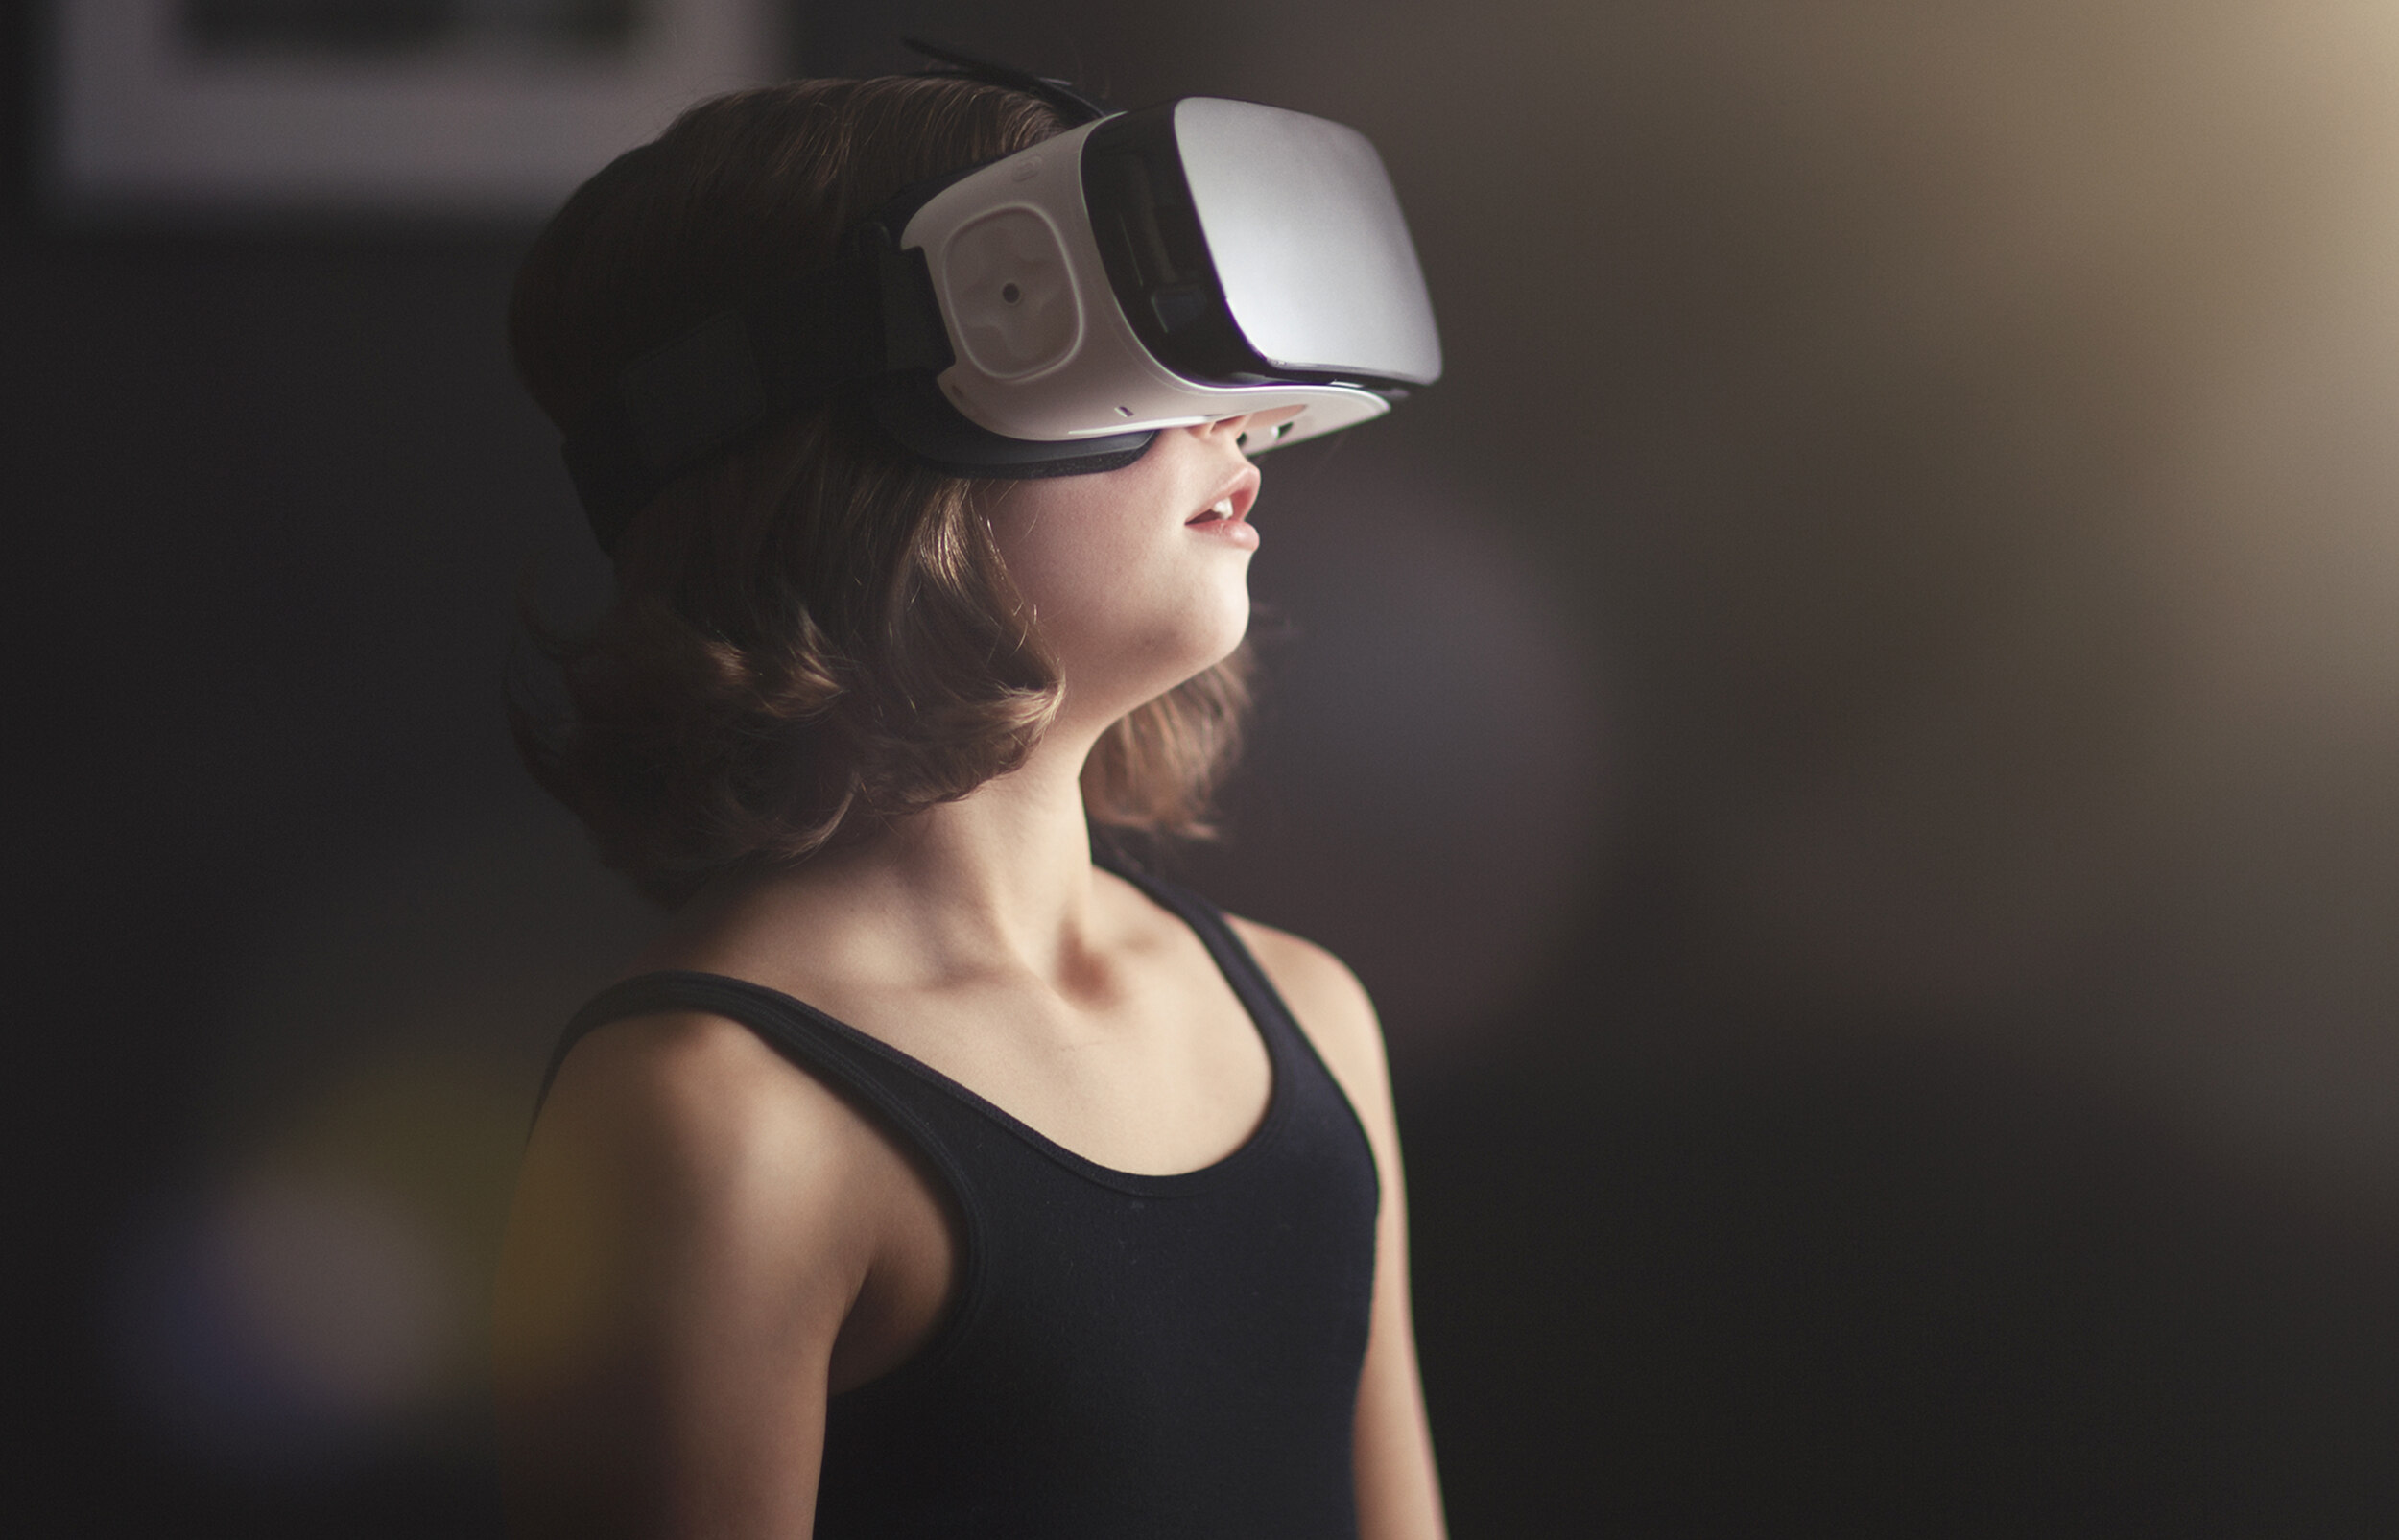 The Dangers Of VR For Kids